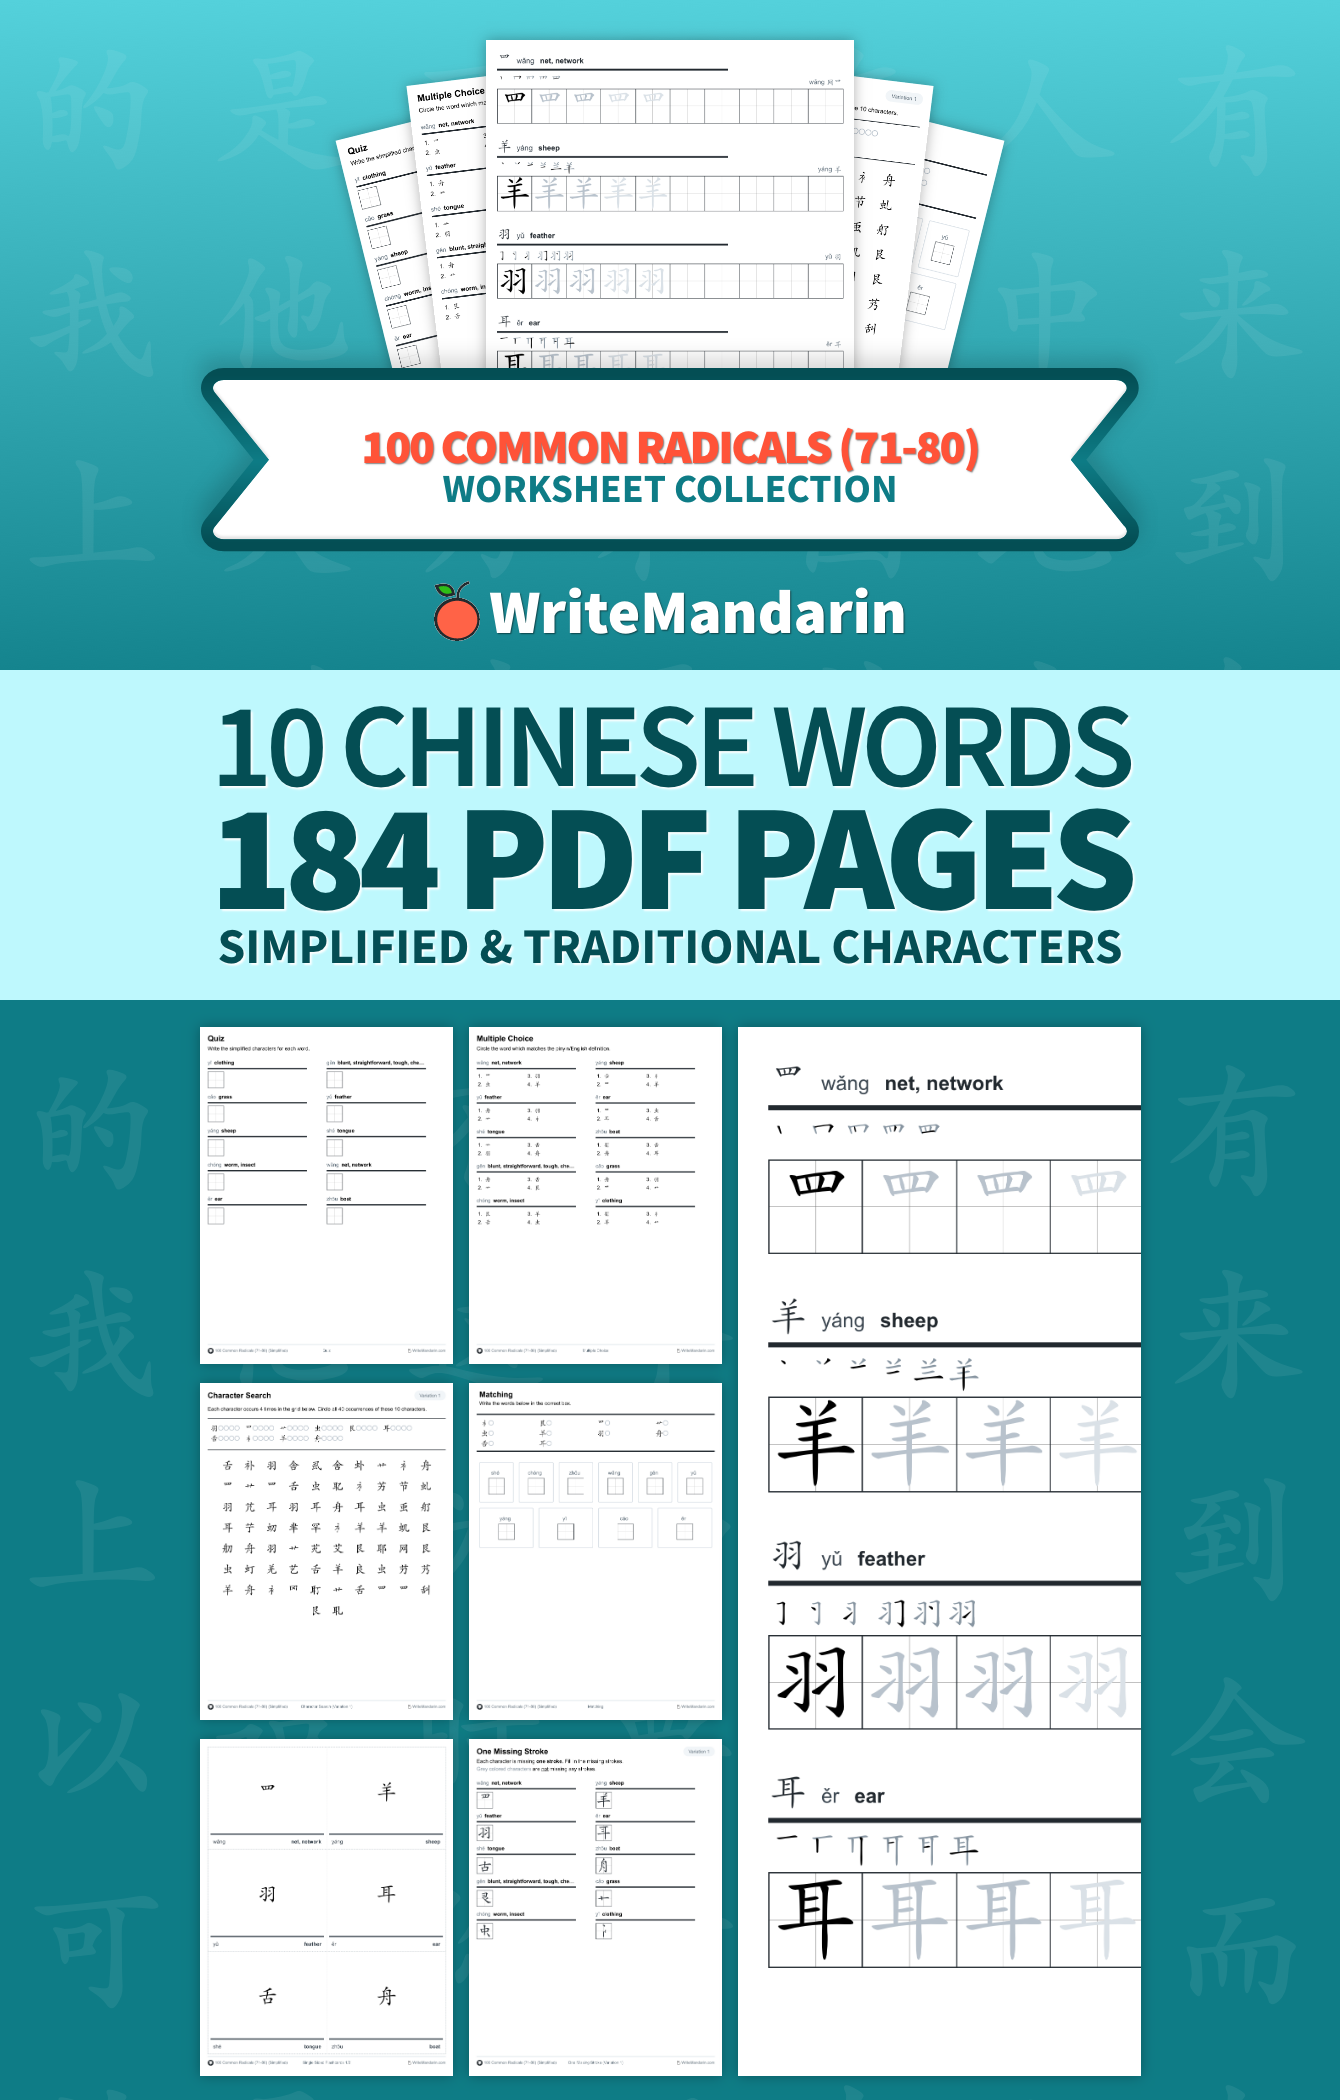 Preview image of 100 Common Radicals (71-80) worksheet collection